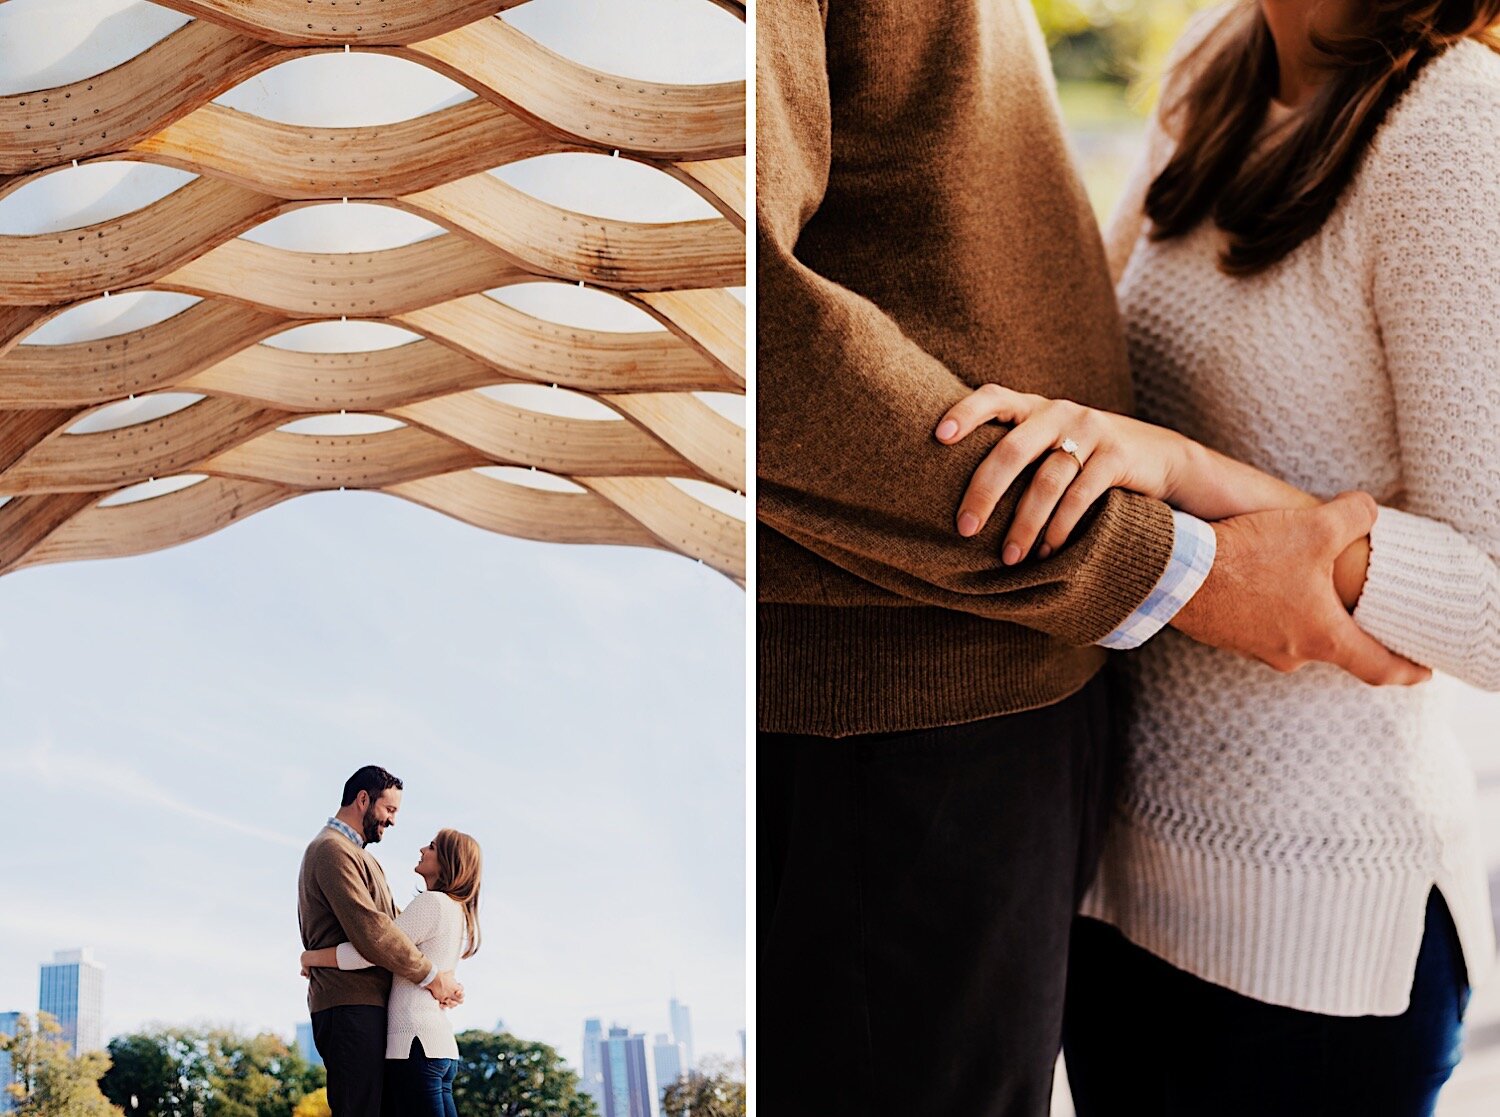 37_Julia-Andy-Chicago-EngagementSession-122_Julia-Andy-Chicago-EngagementSession-120.jpg